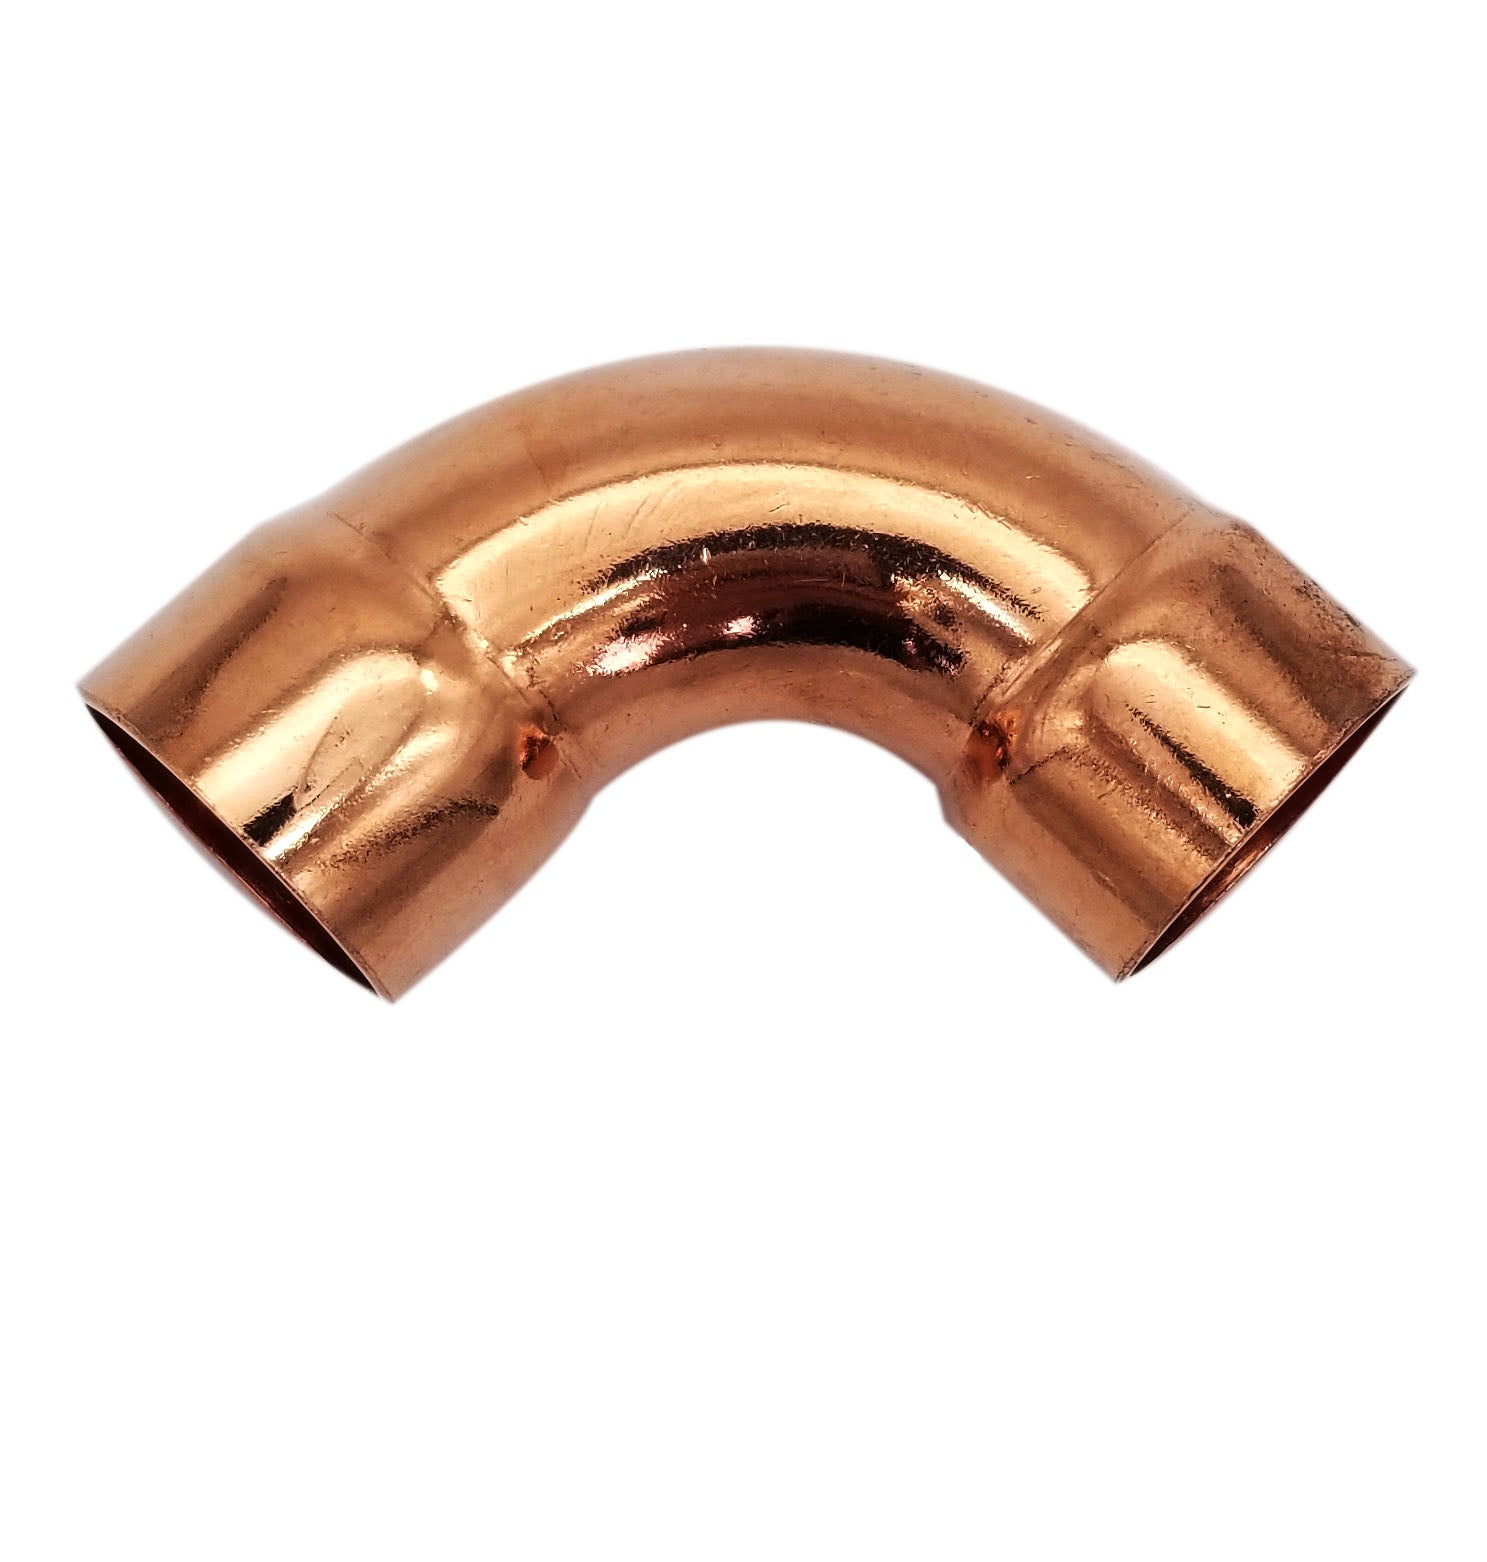 Copper Fitting 3/4 Inch (HVAC Outer Dimension) 5/8 Inch (Plumbing Inner Dimension) - Copper Long Radius 90° Elbow Fitting with 2 Solder Cups & HVAC – 99.9% Pure Copper - 5 Pack